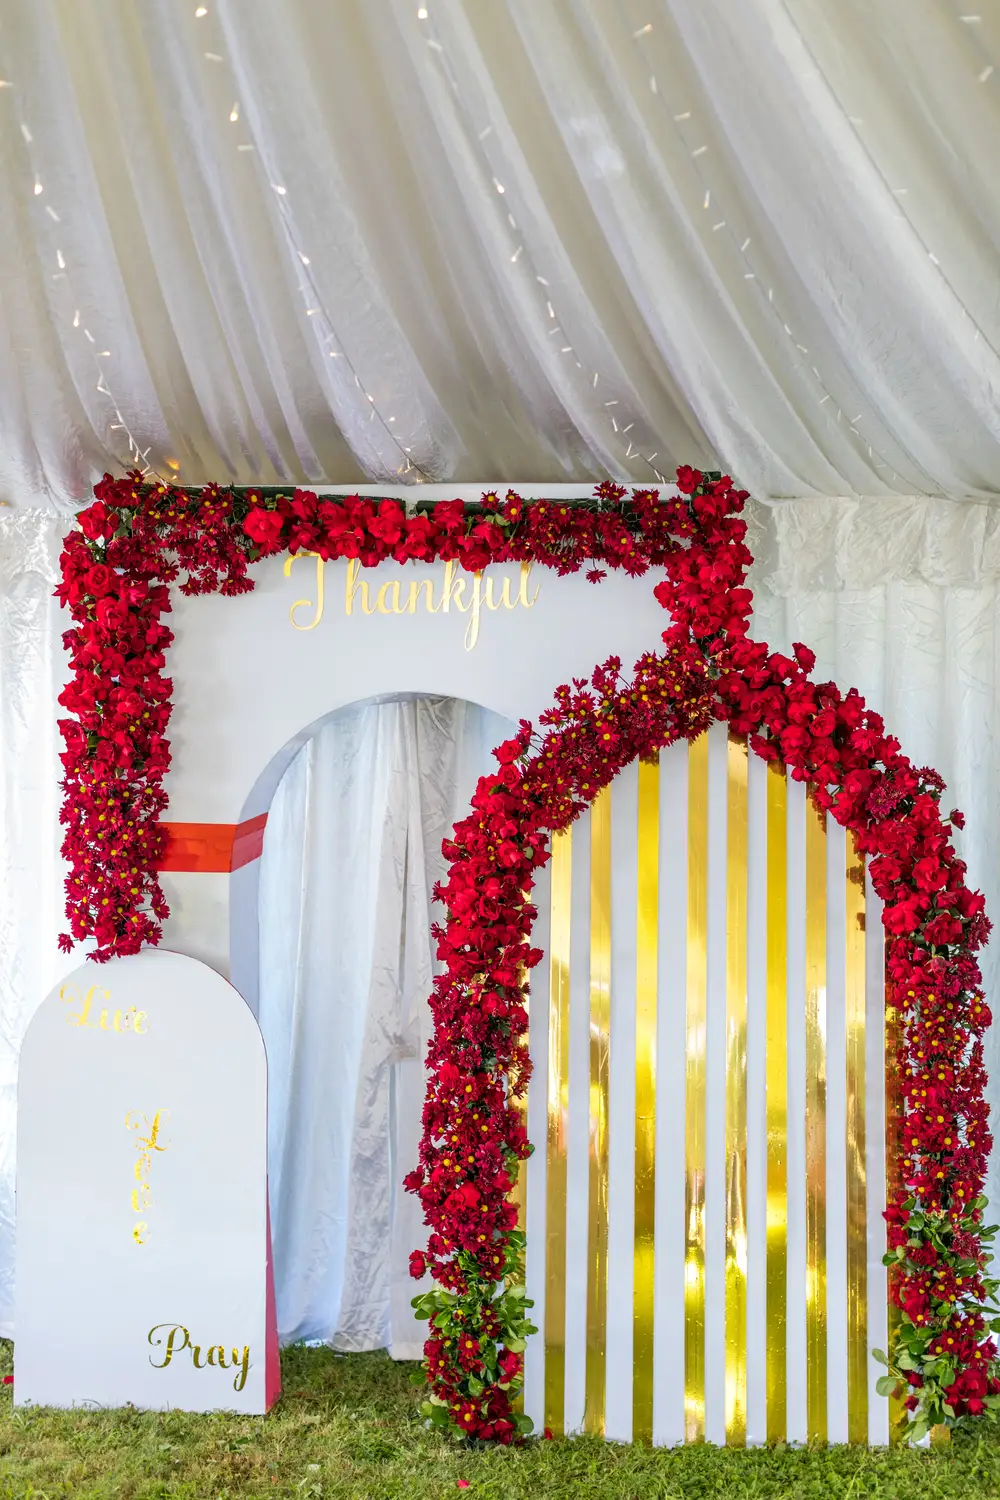 Flower arc and Interior Decorations for an event